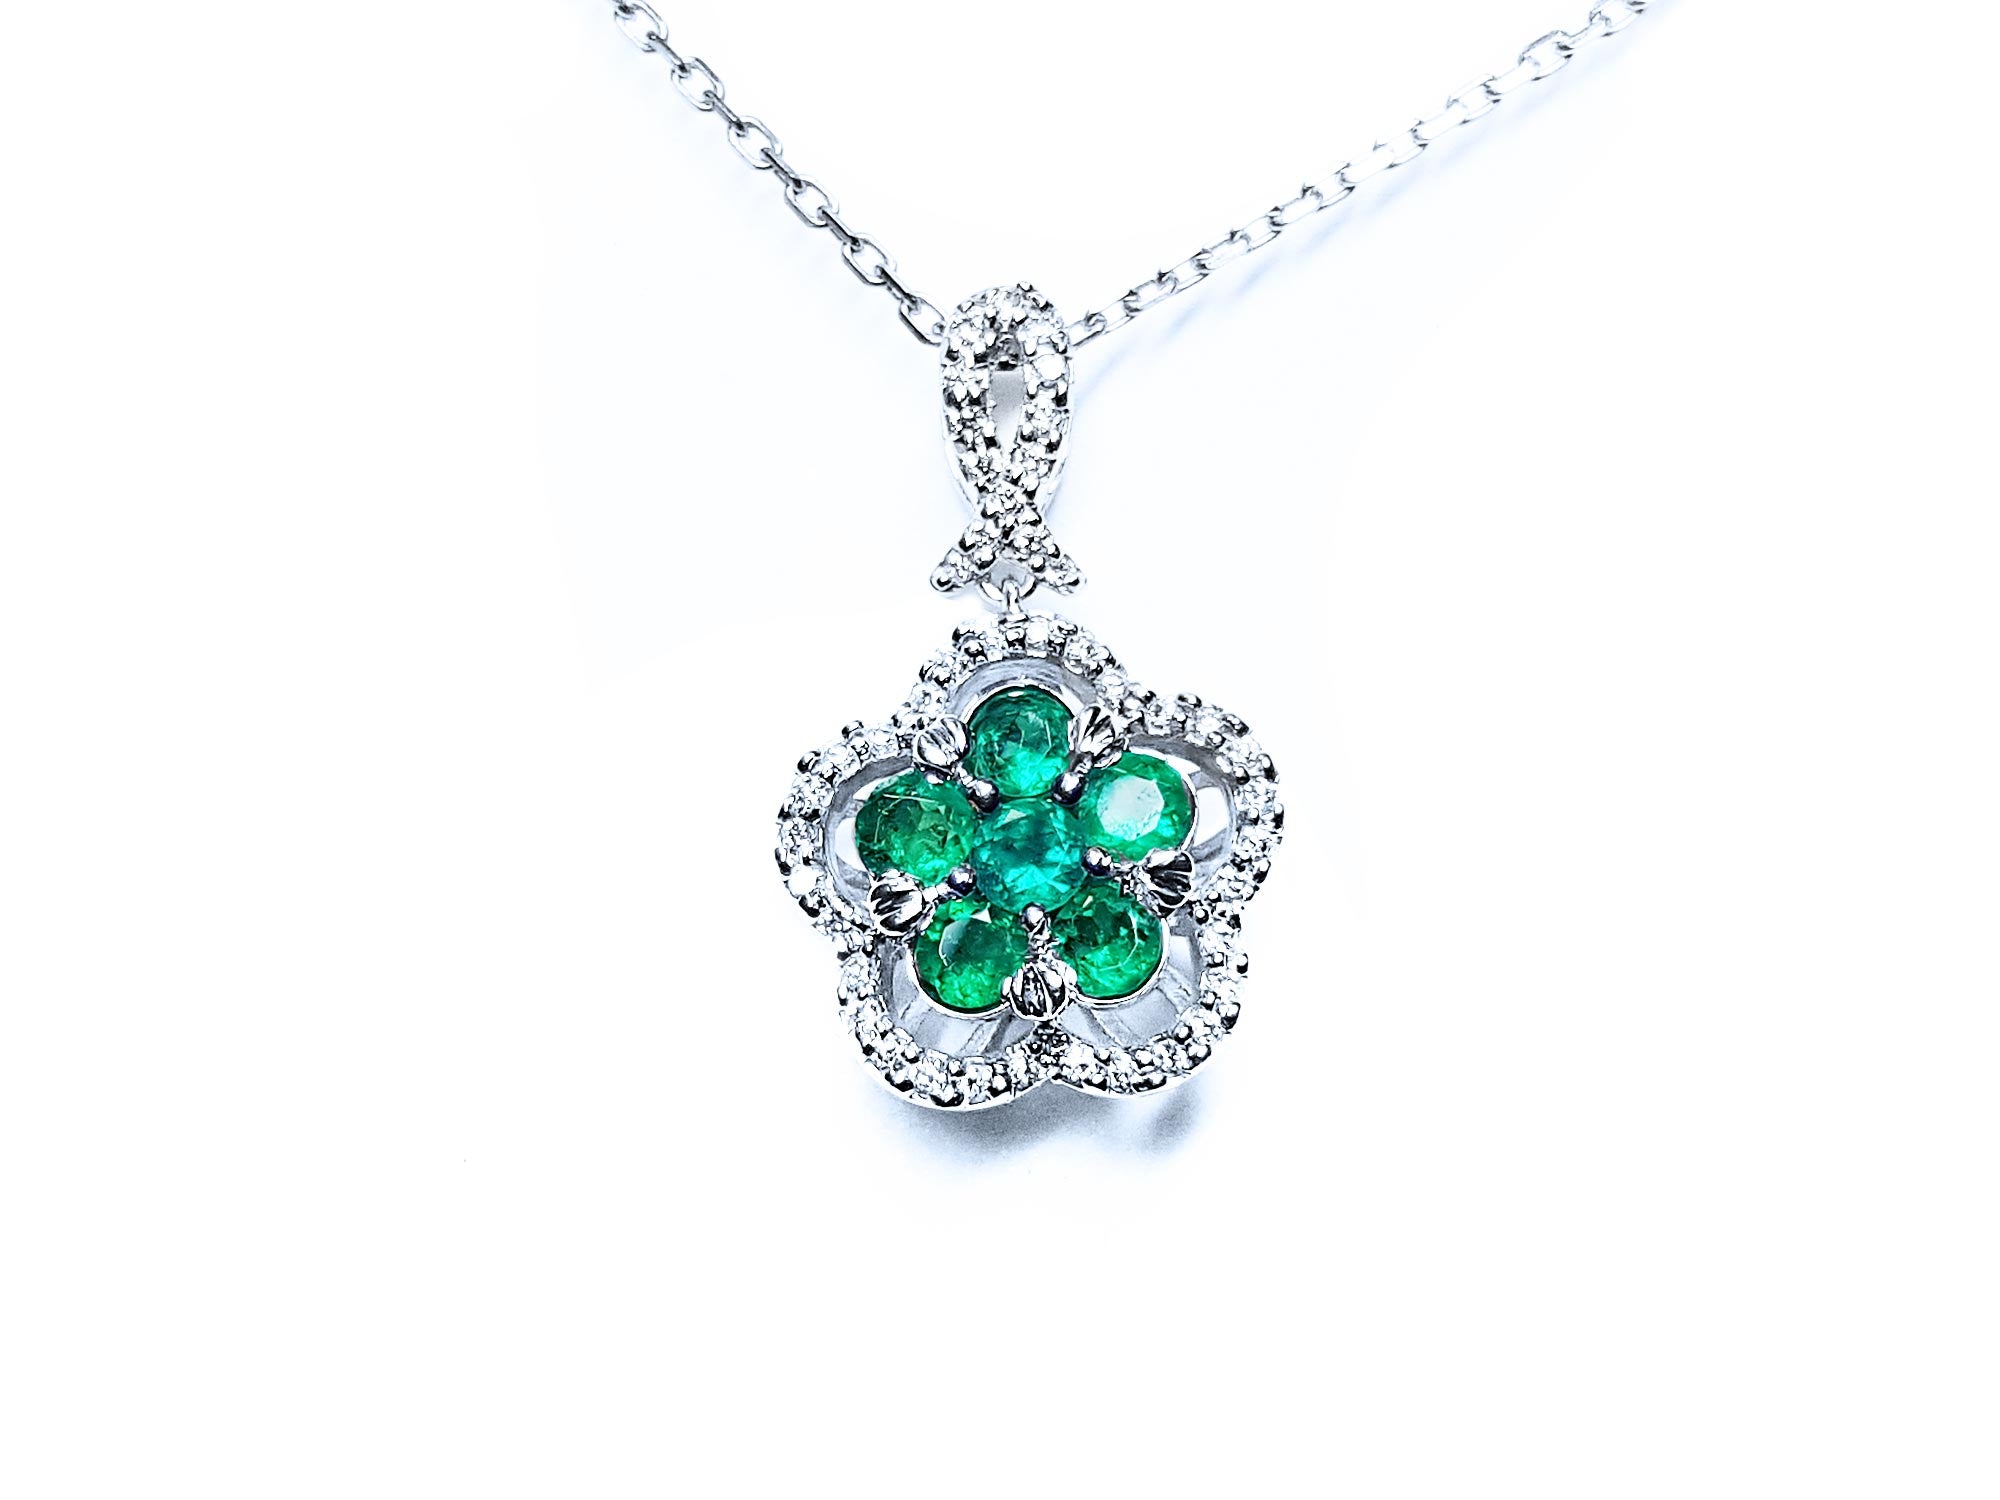 Emerald jewelry for sale